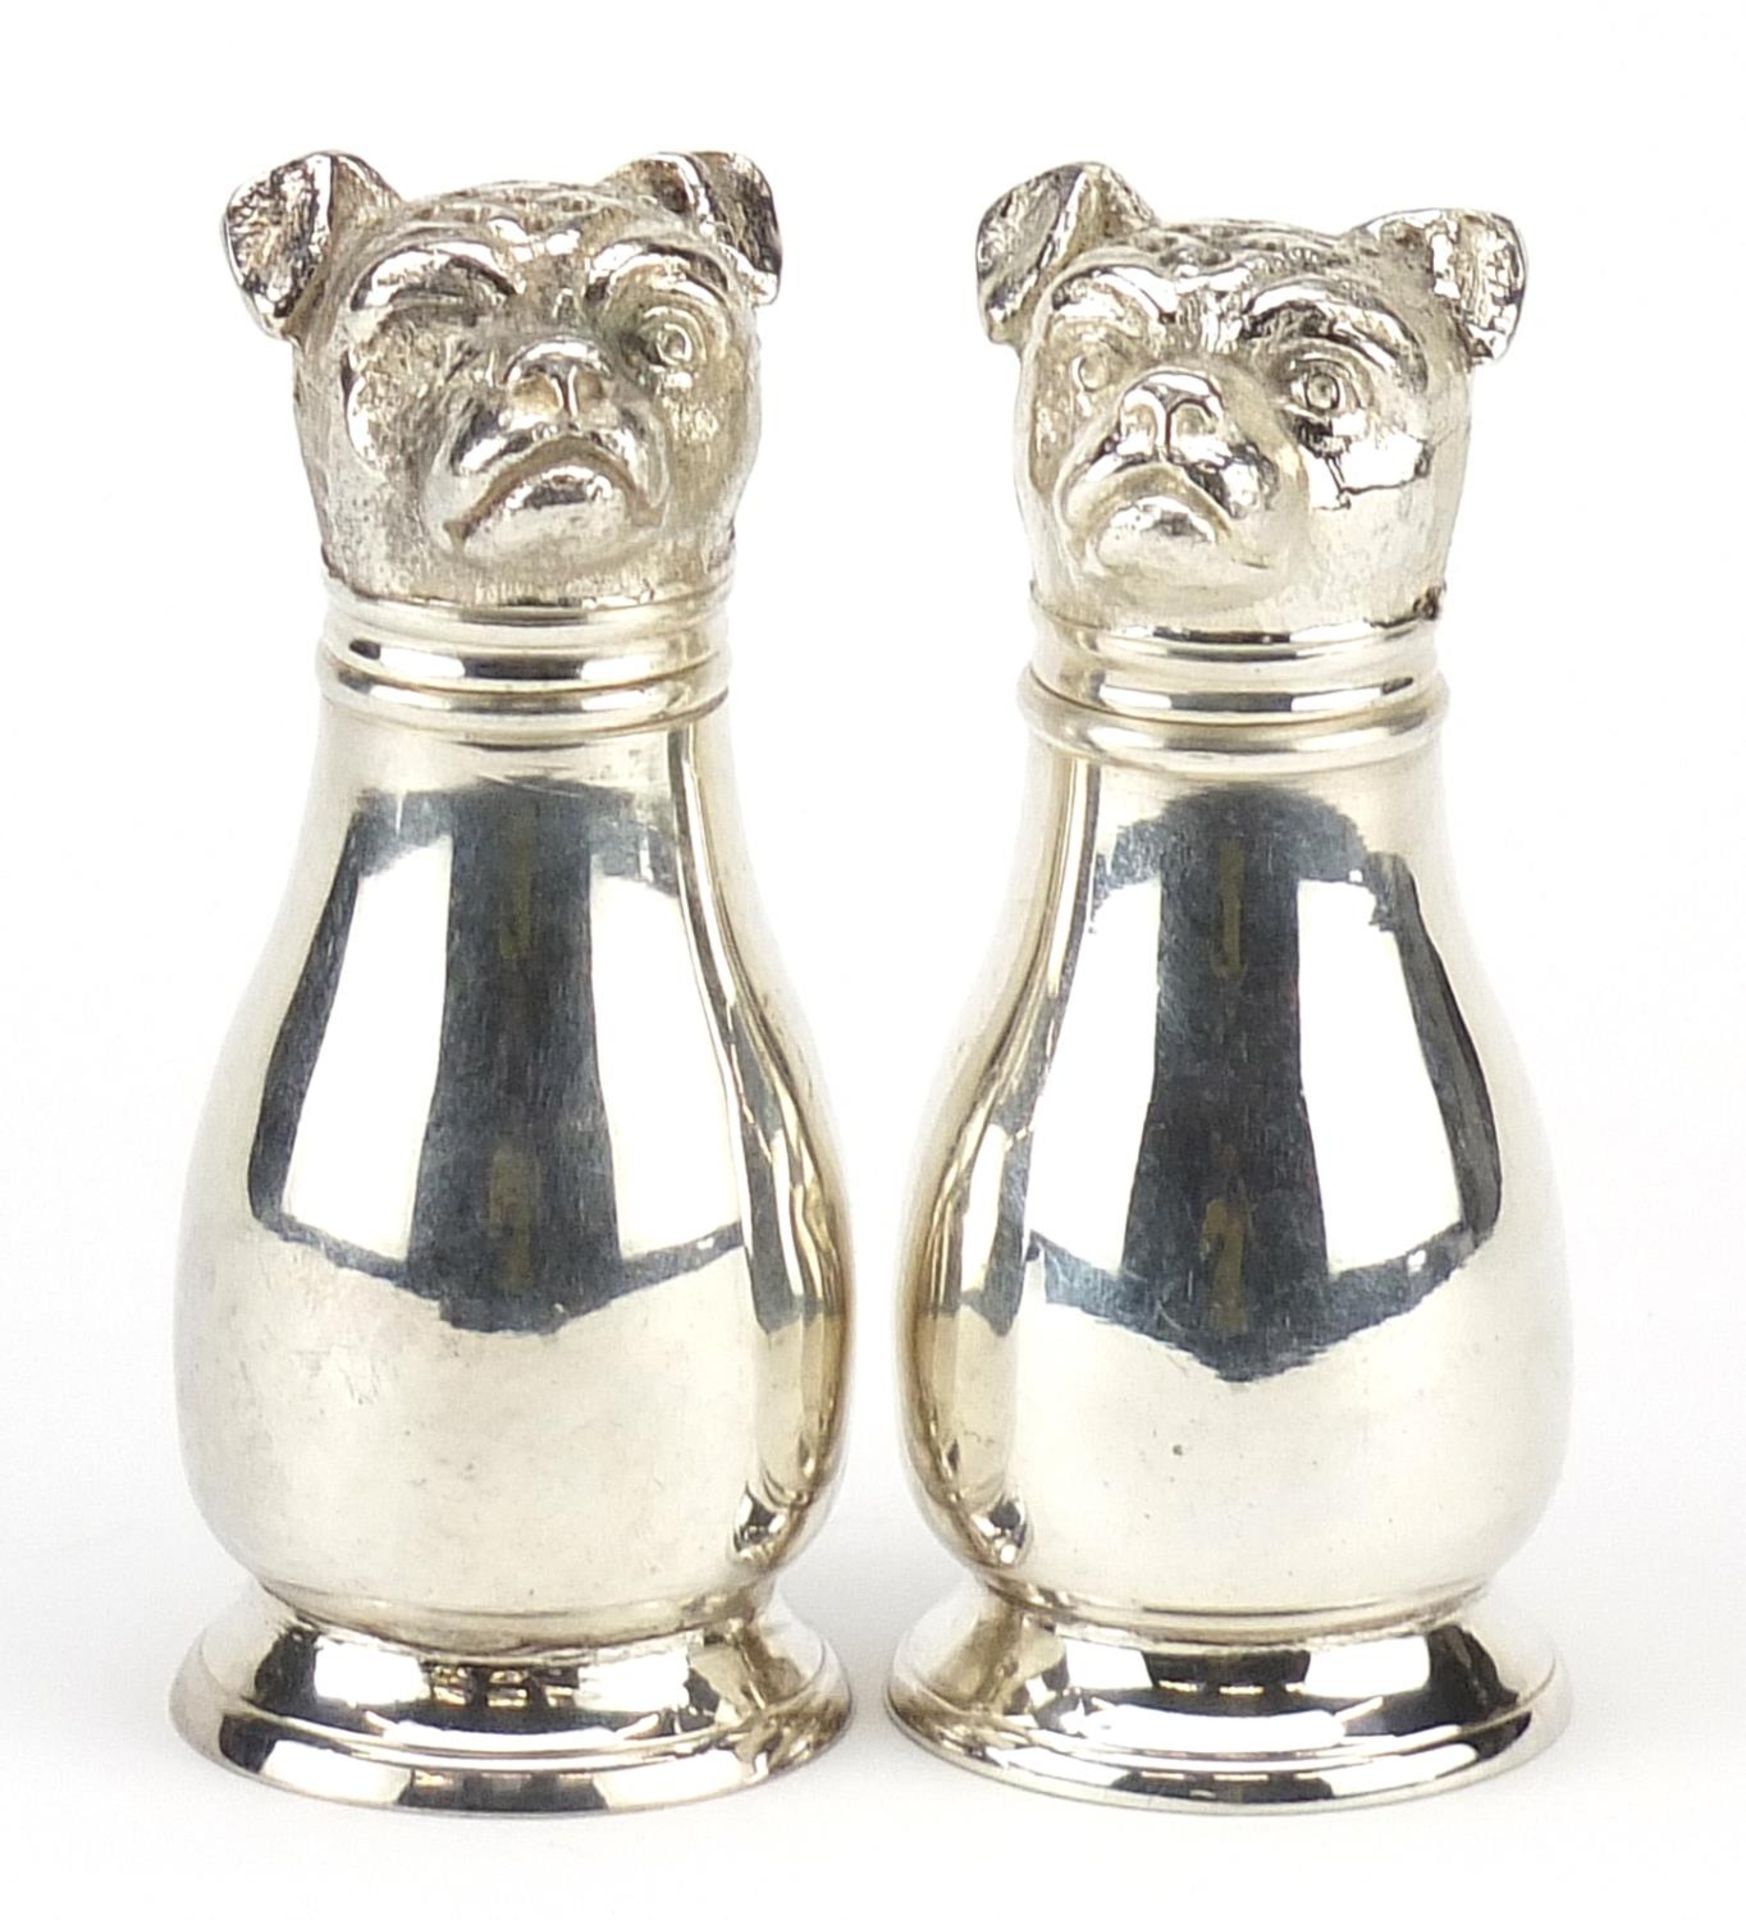 Pair of novelty silver plated casters in the form of French Bulldogs, 10.5cm high Appears to be in